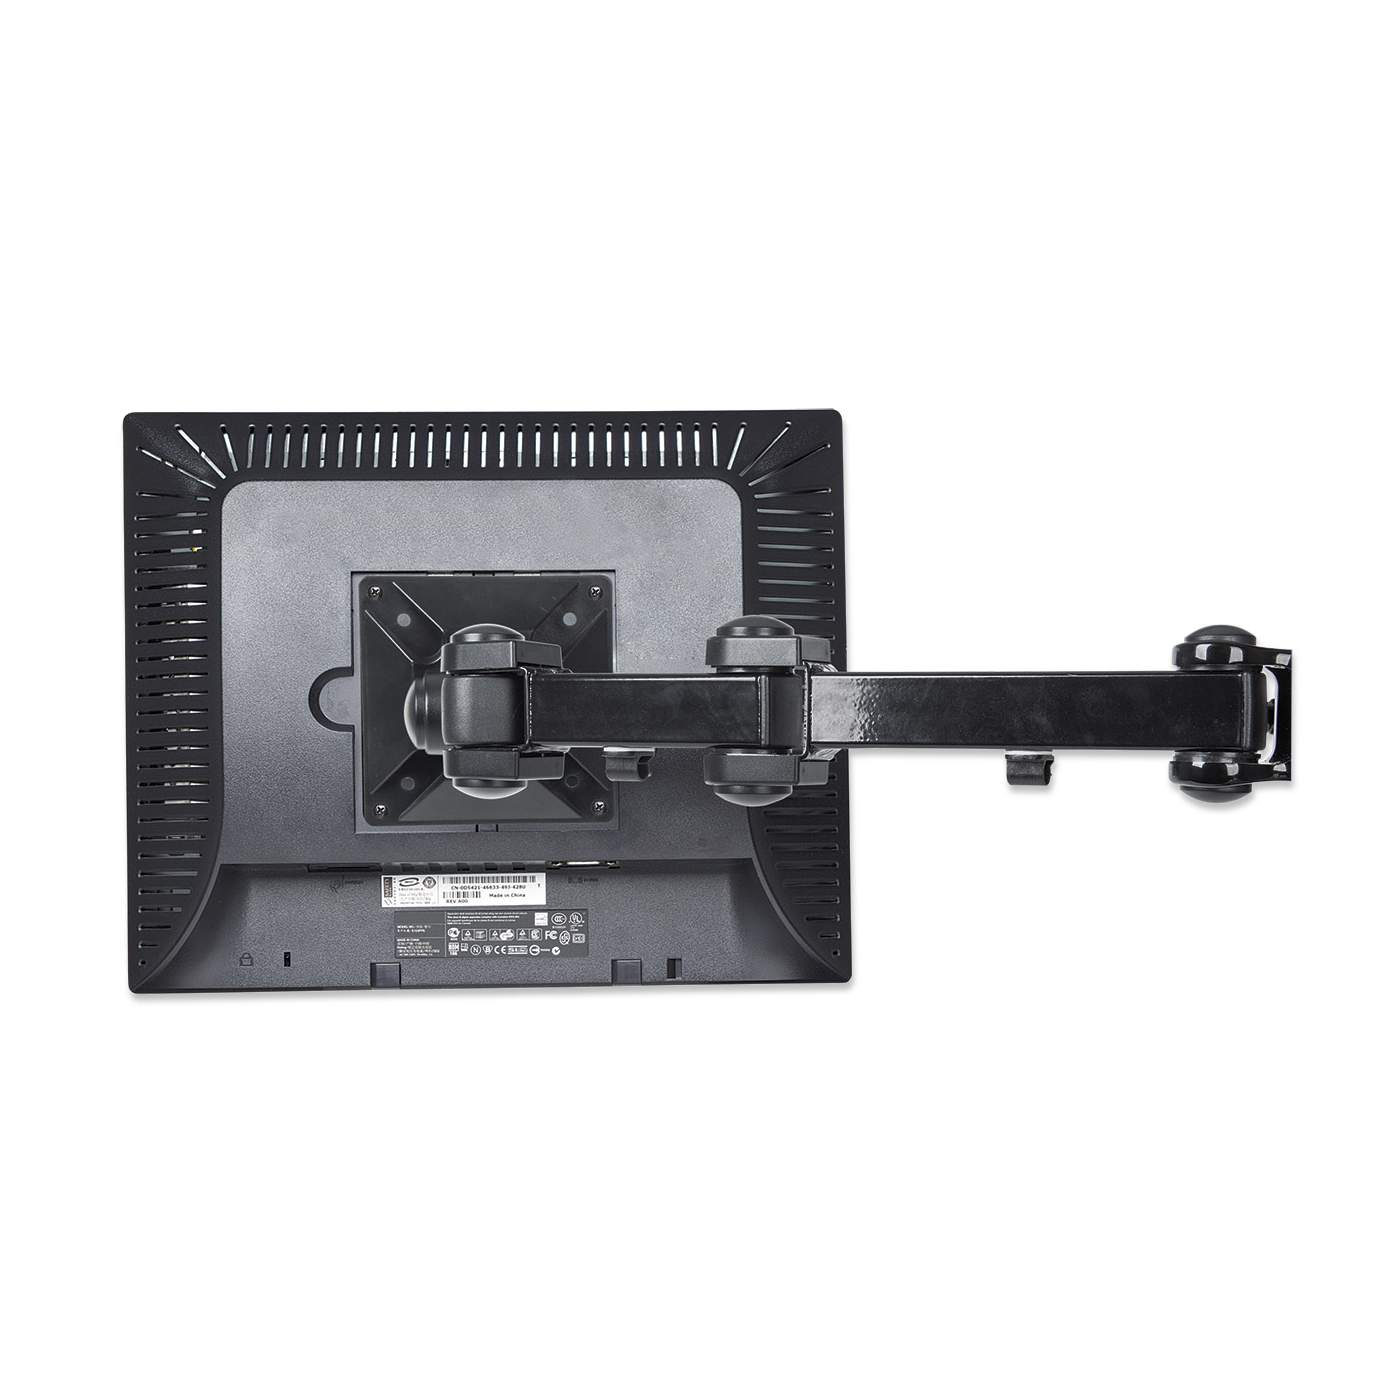 LCD Monitor Mount with Double-Link Swing Arms Image 4